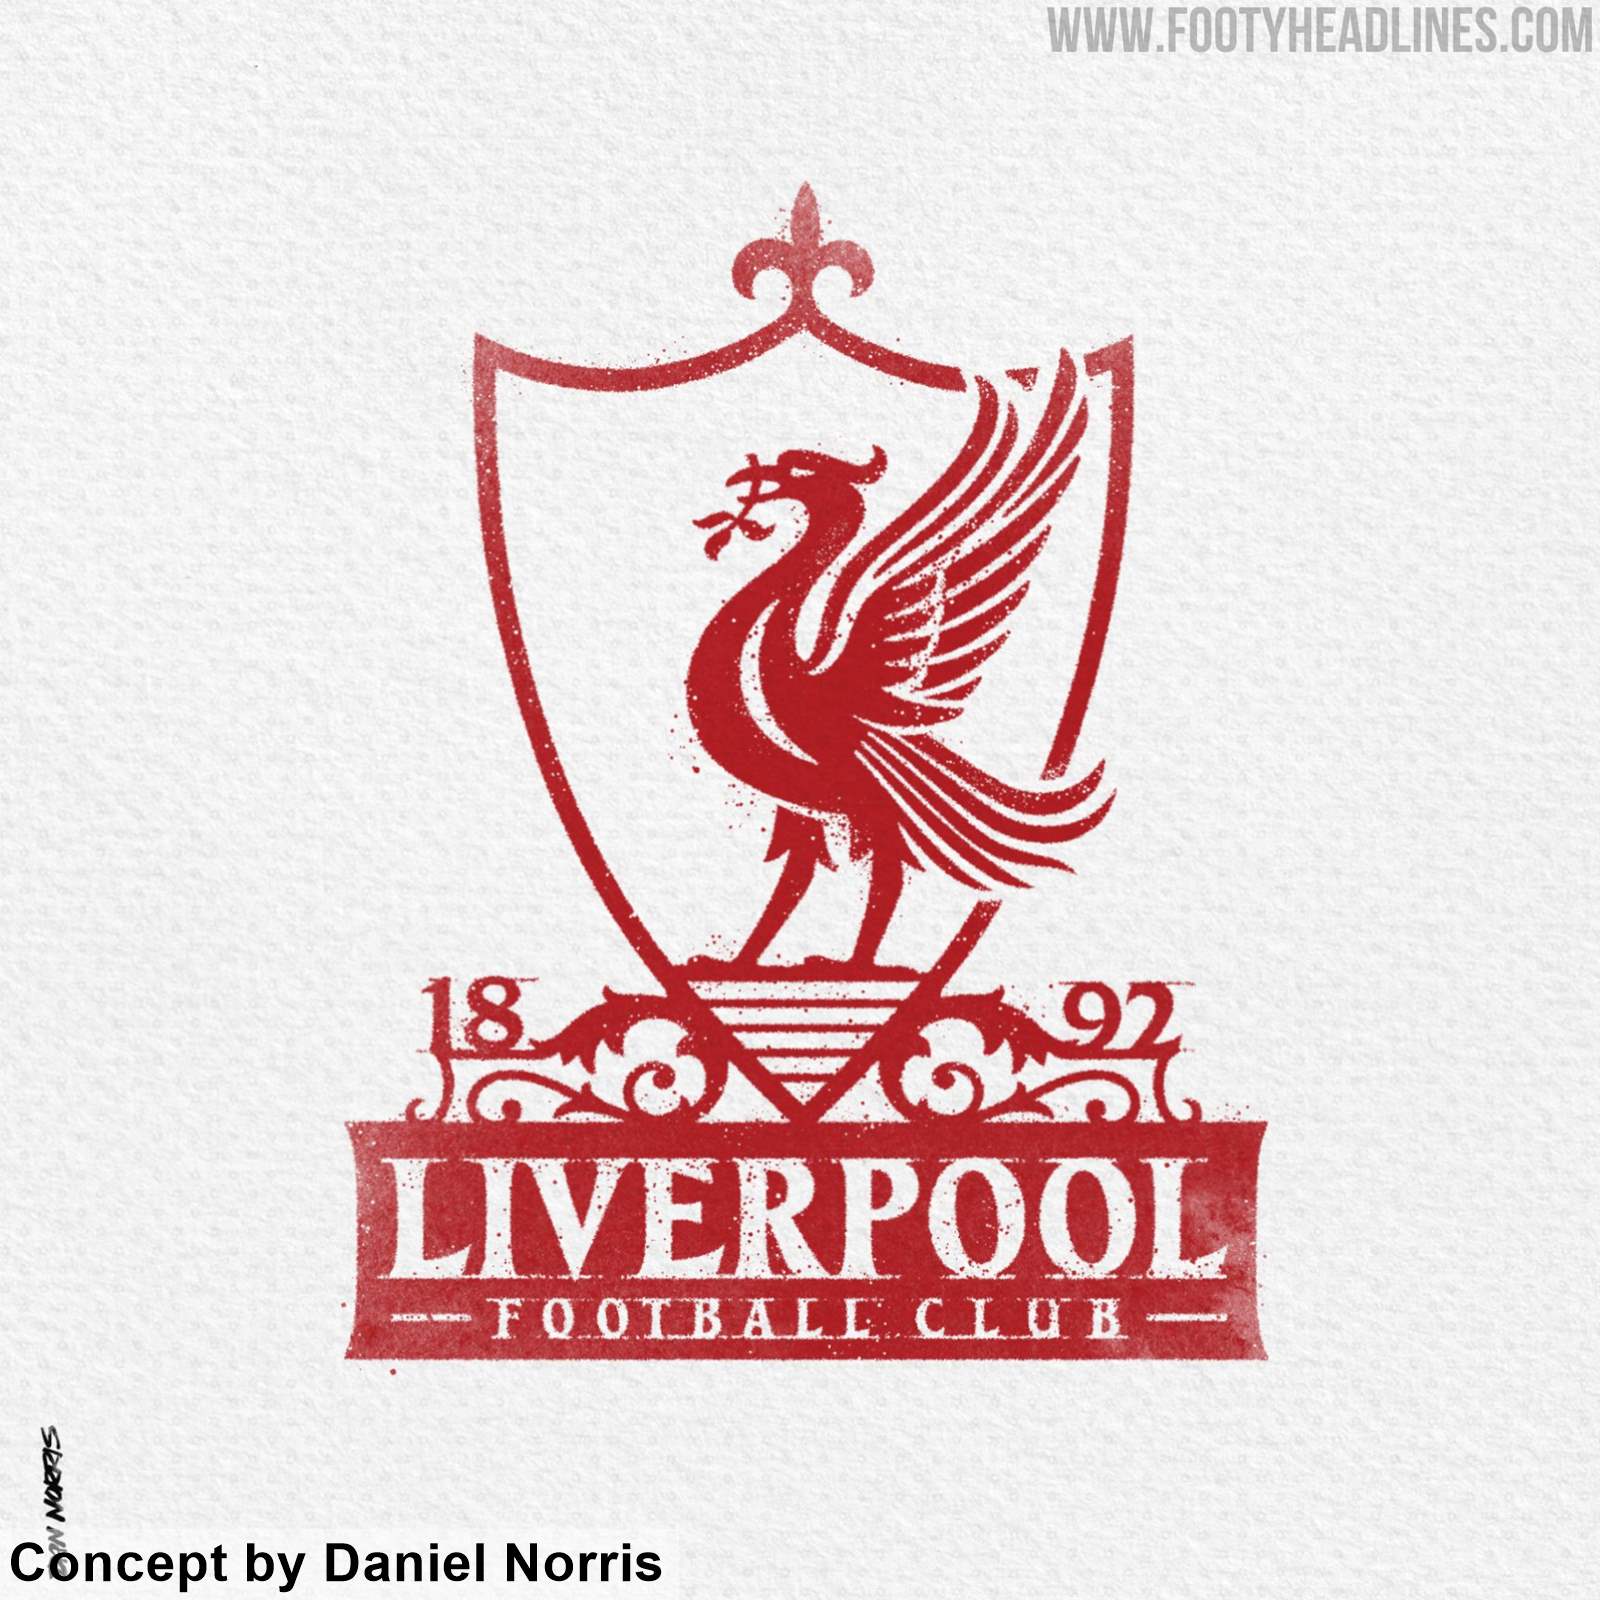 Should Liverpool Think About Updating Their Logo? - Footy Headlines